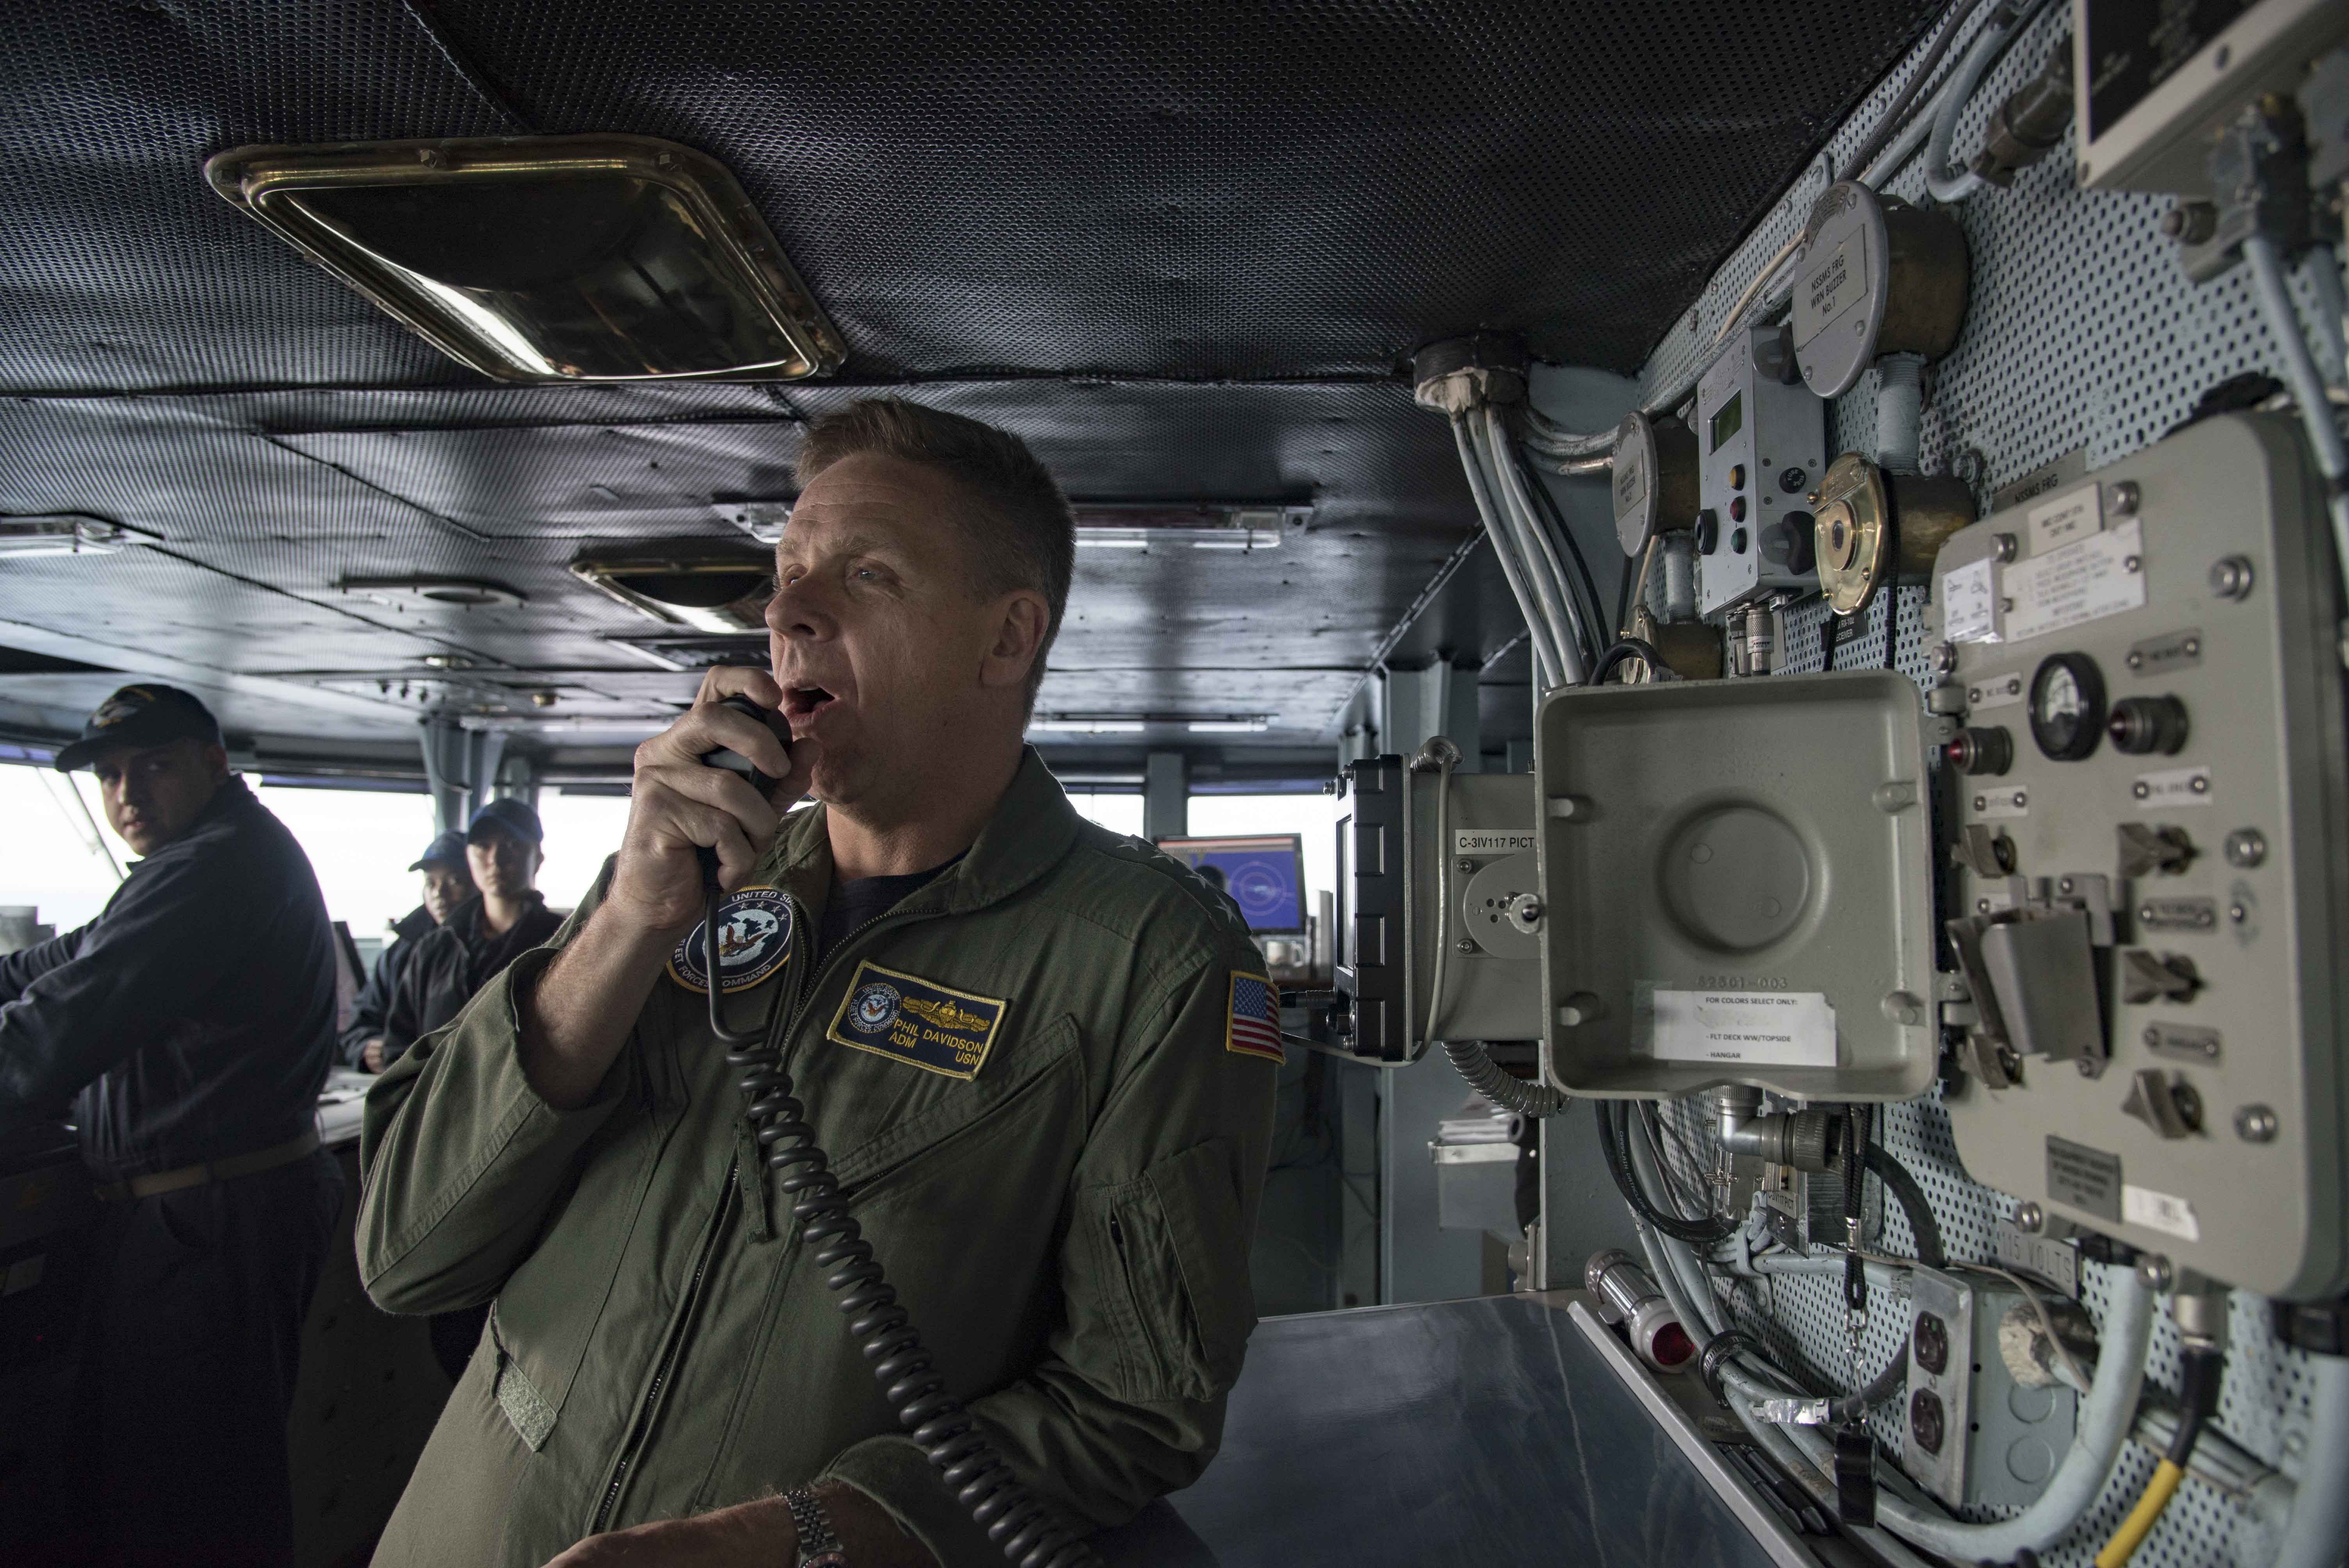 Adm. Phil Davidson, commander, U.S. Fleet Forces, addresses the crew of the aircraft carrier USS Dwight D. Eisenhower (CVN 69) (Ike) on Dec. 29, 2016, using the 1MC on the navigational bridge. Ike and its carrier strike group are returning from a 7-month combat deployment to the U.S. 5th and 6th Fleet areas of operation in support of Operation Inherent Resolve, maritime security operations and theater security cooperation efforts. US Navy photo. 